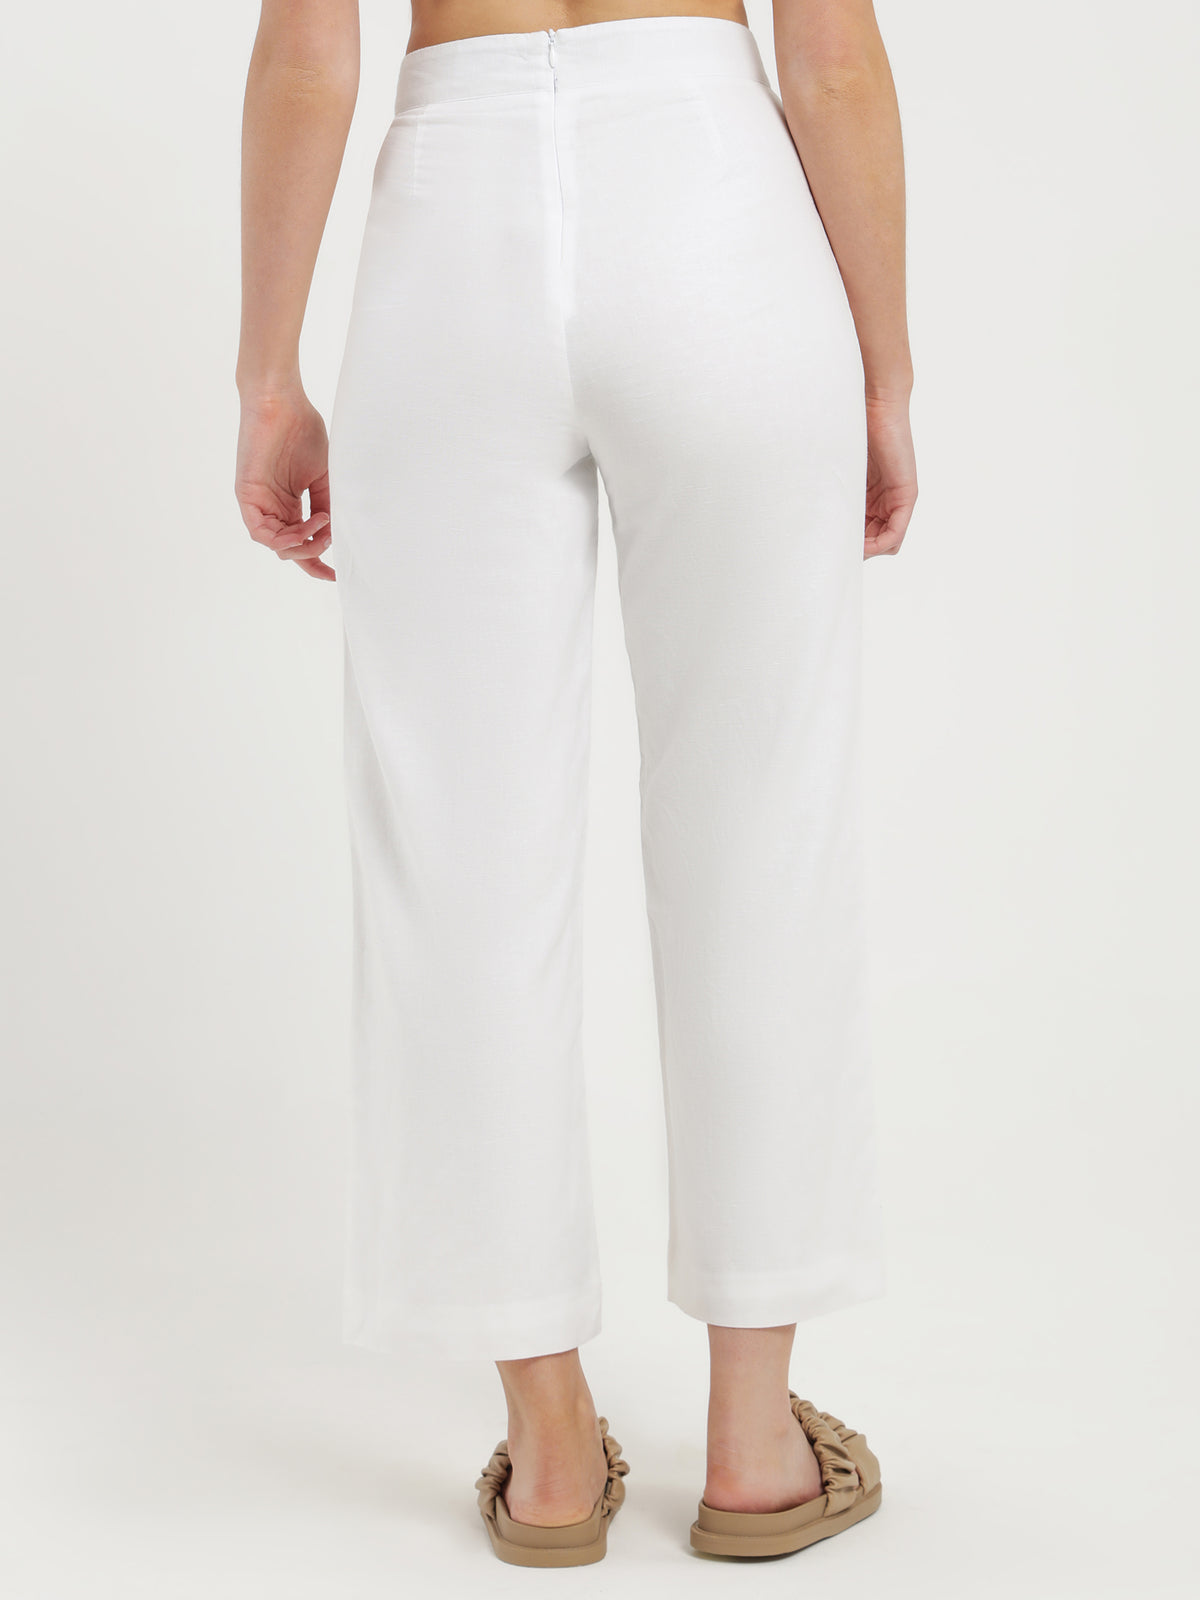 Classic Culotte Pants in White